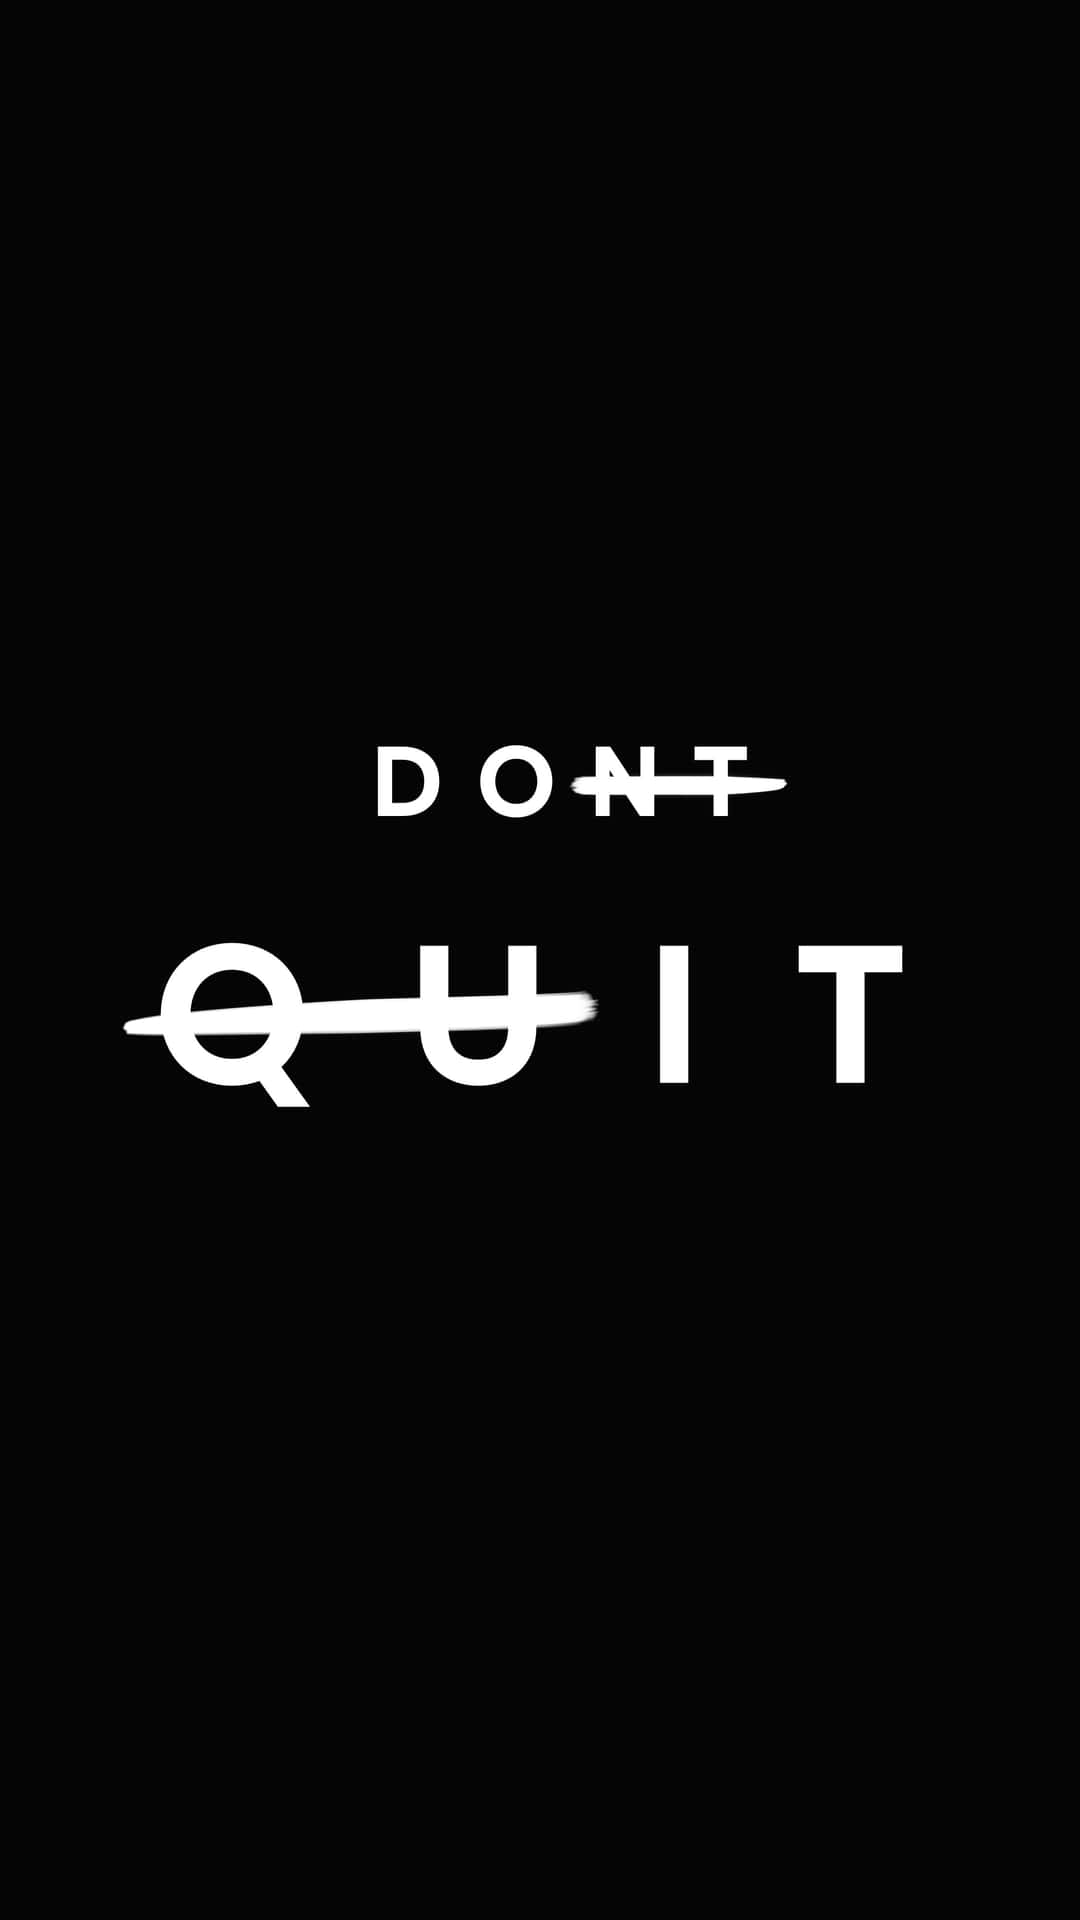 Download Don't Quit T-shirt By Sassy Tees | Wallpapers.com